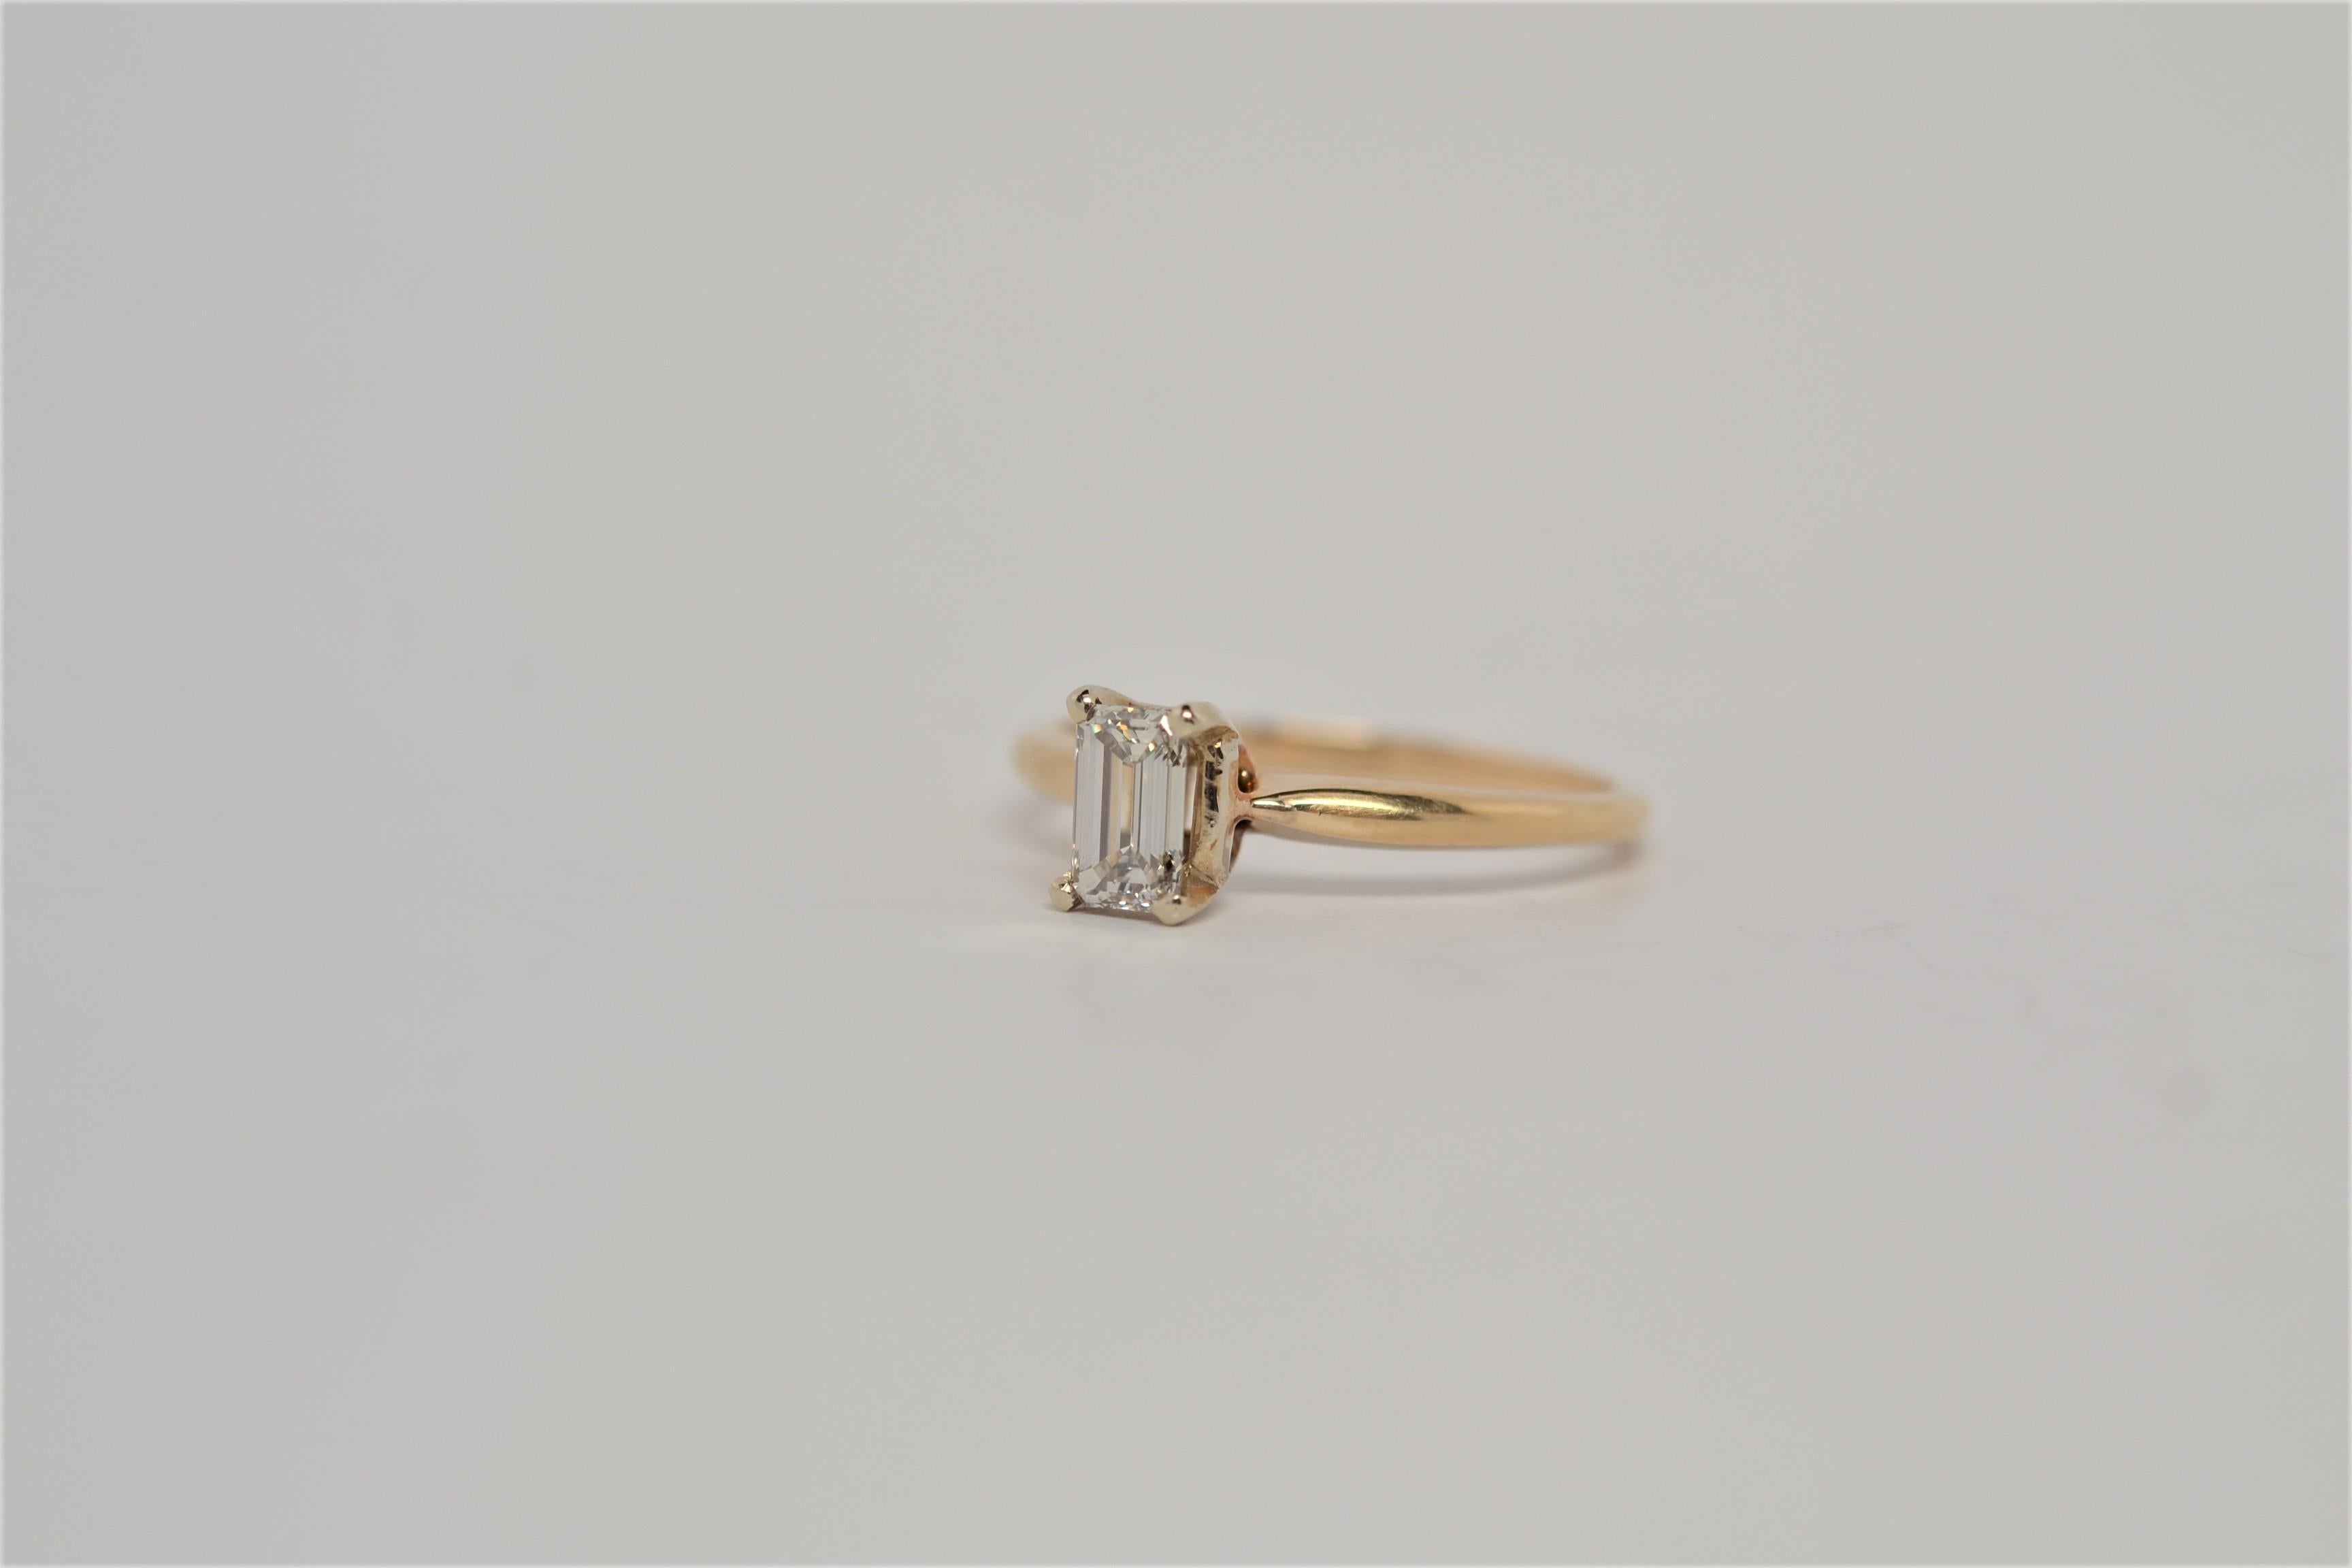 A traditional solitaire engagement ring with Emerald Cut Diamond center. The ring is made in 14K Yellow Gold with a four prong basket to set one diamond. The center is an Emerald Cut Diamond weighing approximately 0.50ct, diamond color grade range K